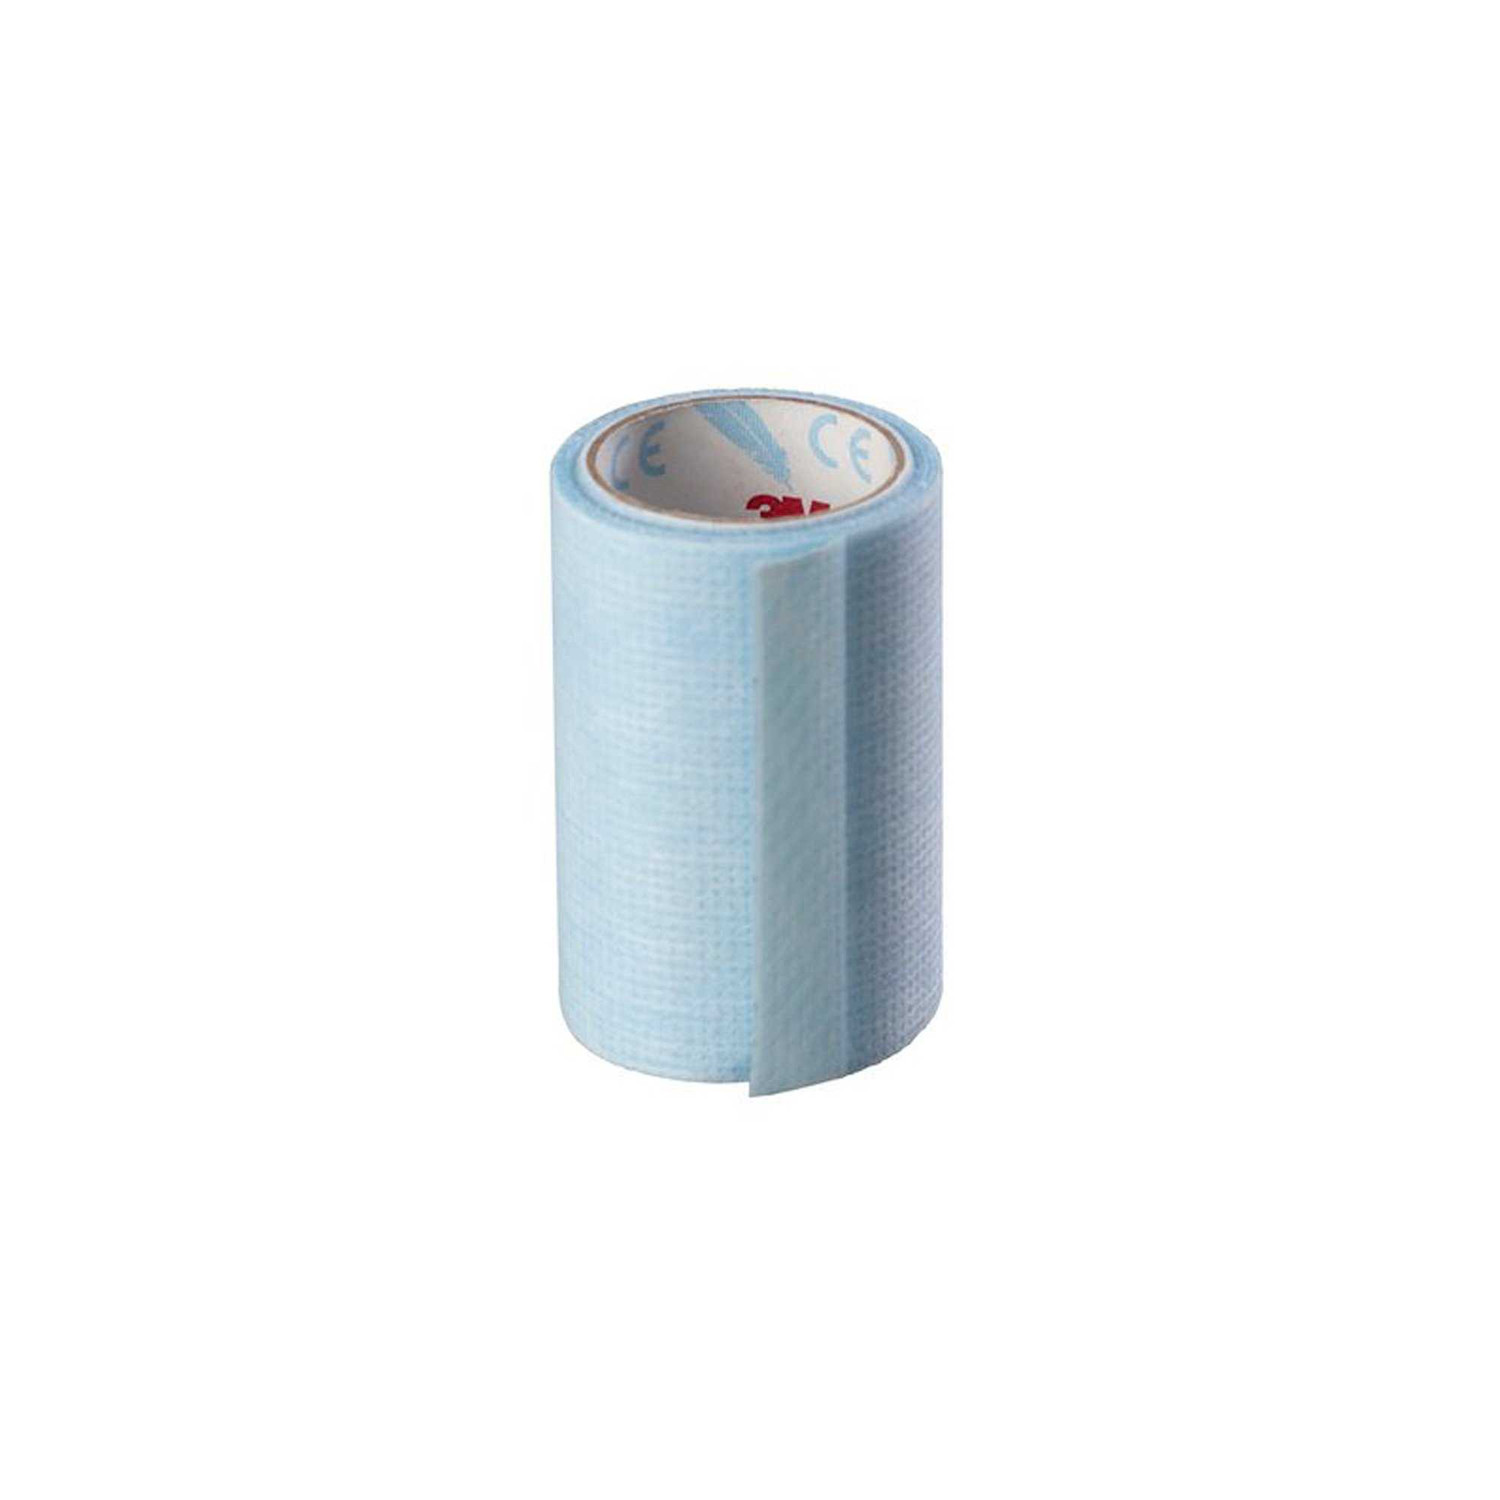 3M Micropore Medical Tape, Non-Sterile, Silicone, Blue, 2 in. x 1 1/2 yds.,  50 Rolls, 1 Pack 